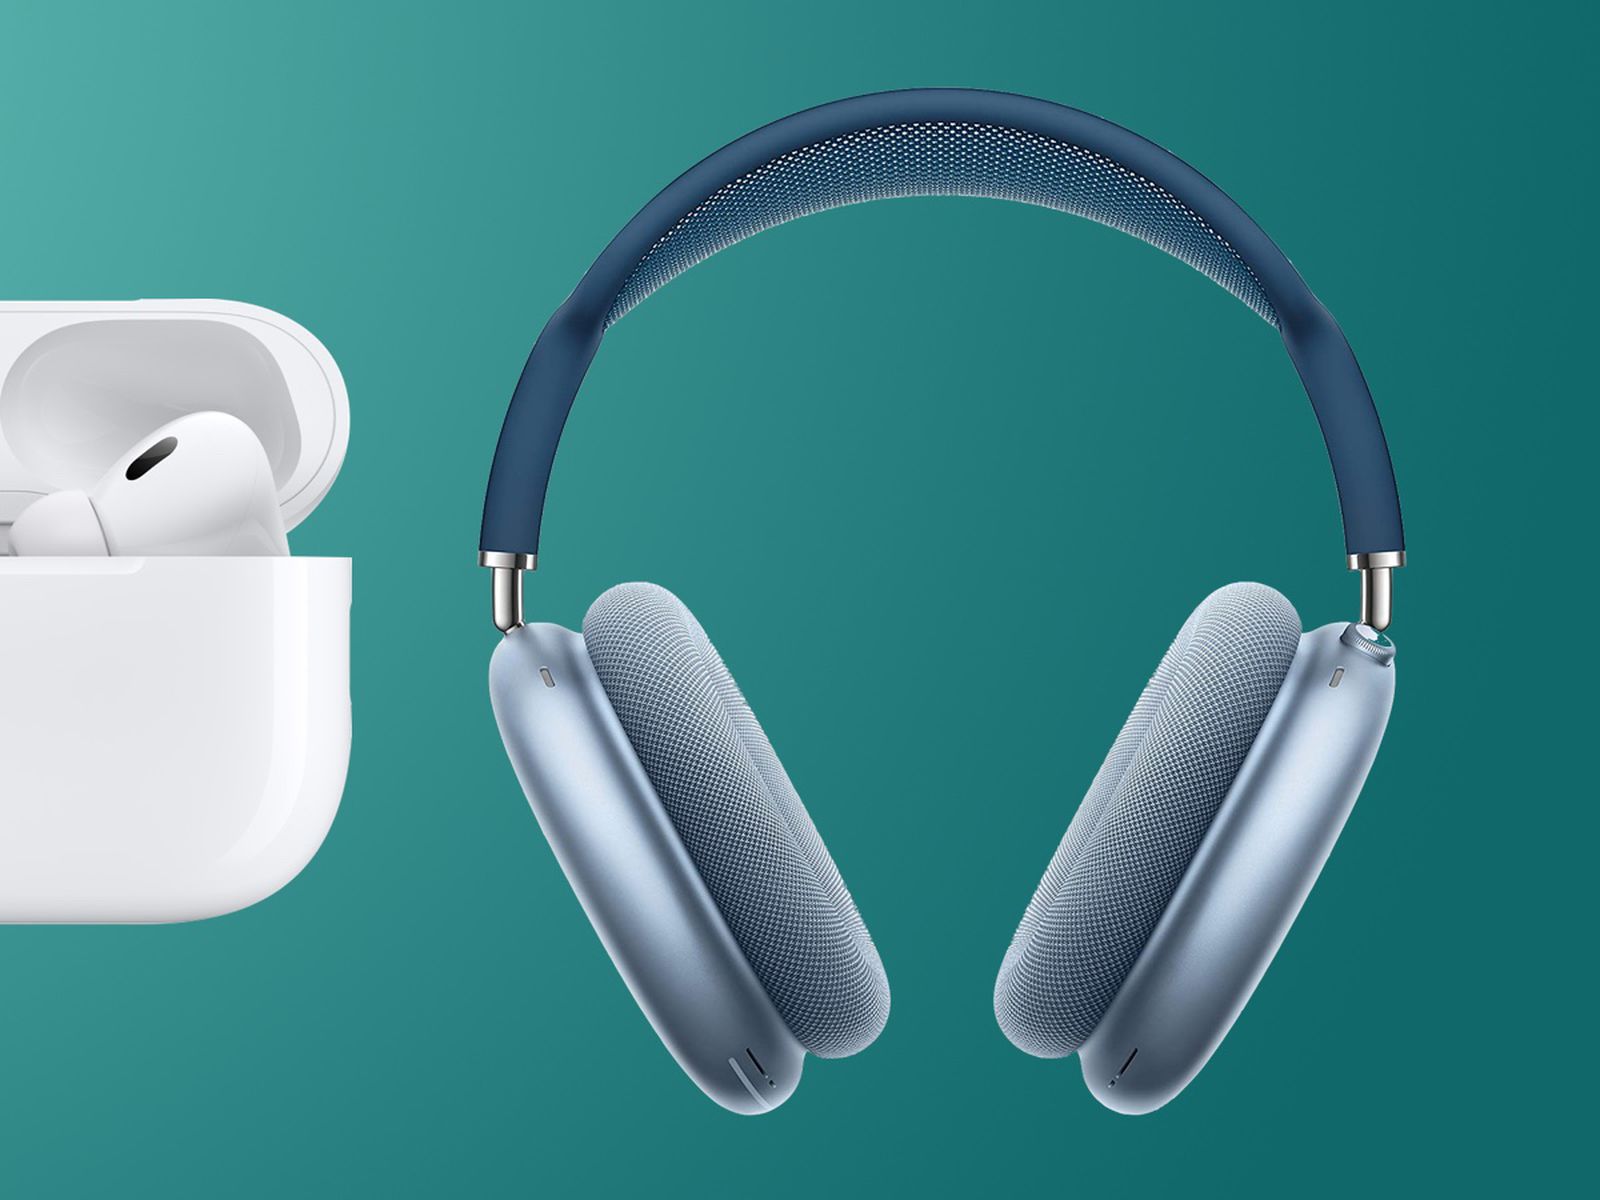 Don't expect Apple's AirPods Max 2 headphones to launch in 2023